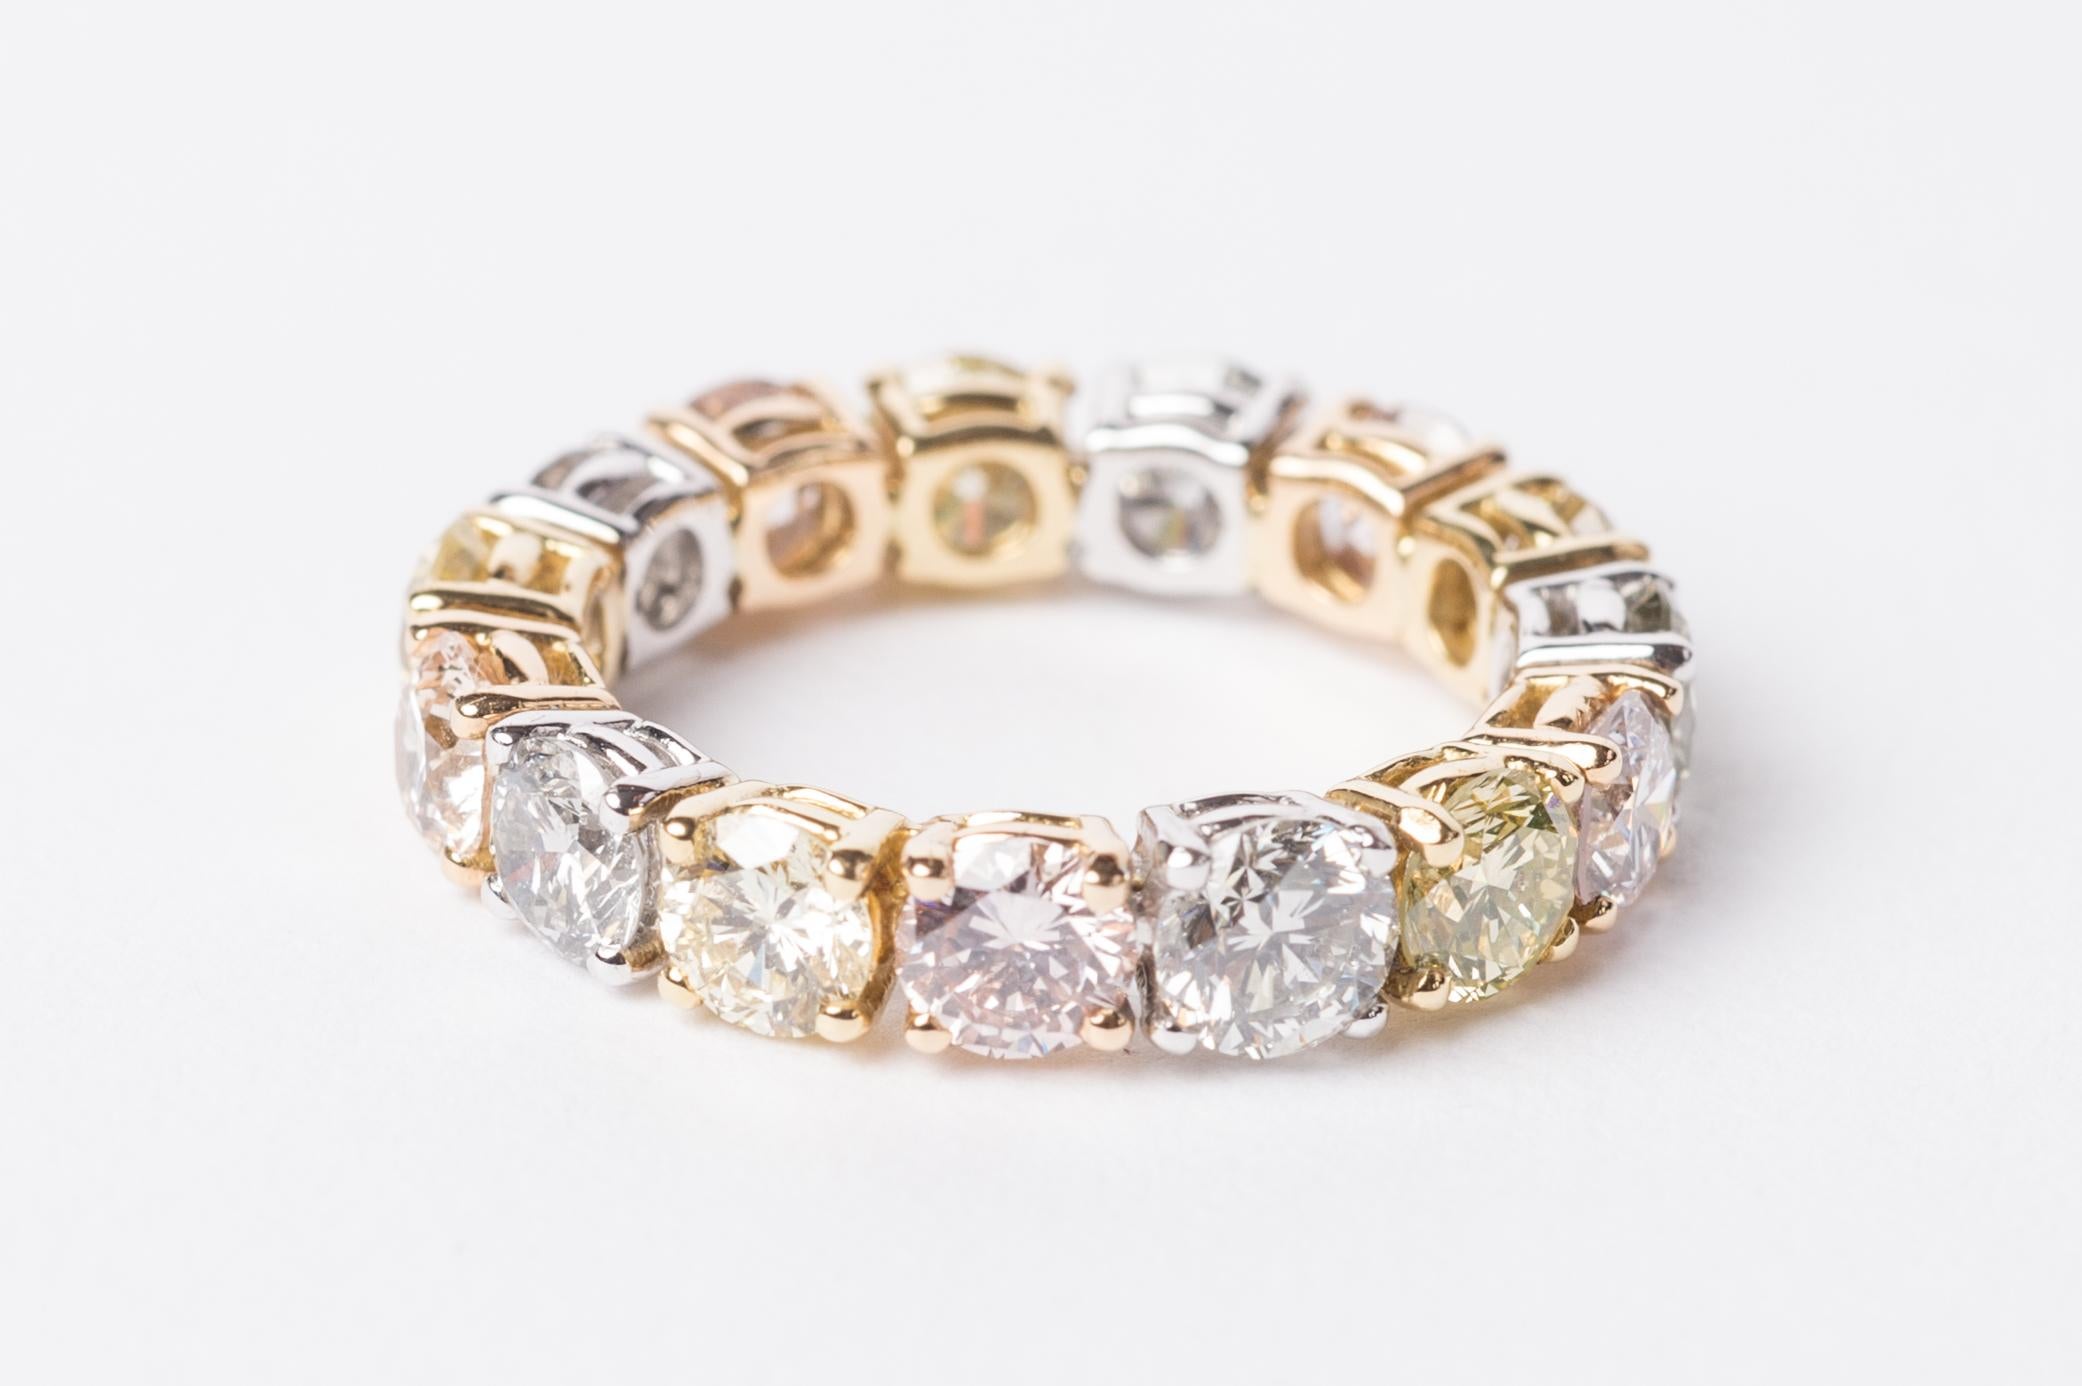 A classic full eternity ring with a twist, this beautiful piece is truly special. This ring combines striking diamonds chosen from the Haruni vault, bringing together pink, yellow and grey stones that perfectly complement one another. The round